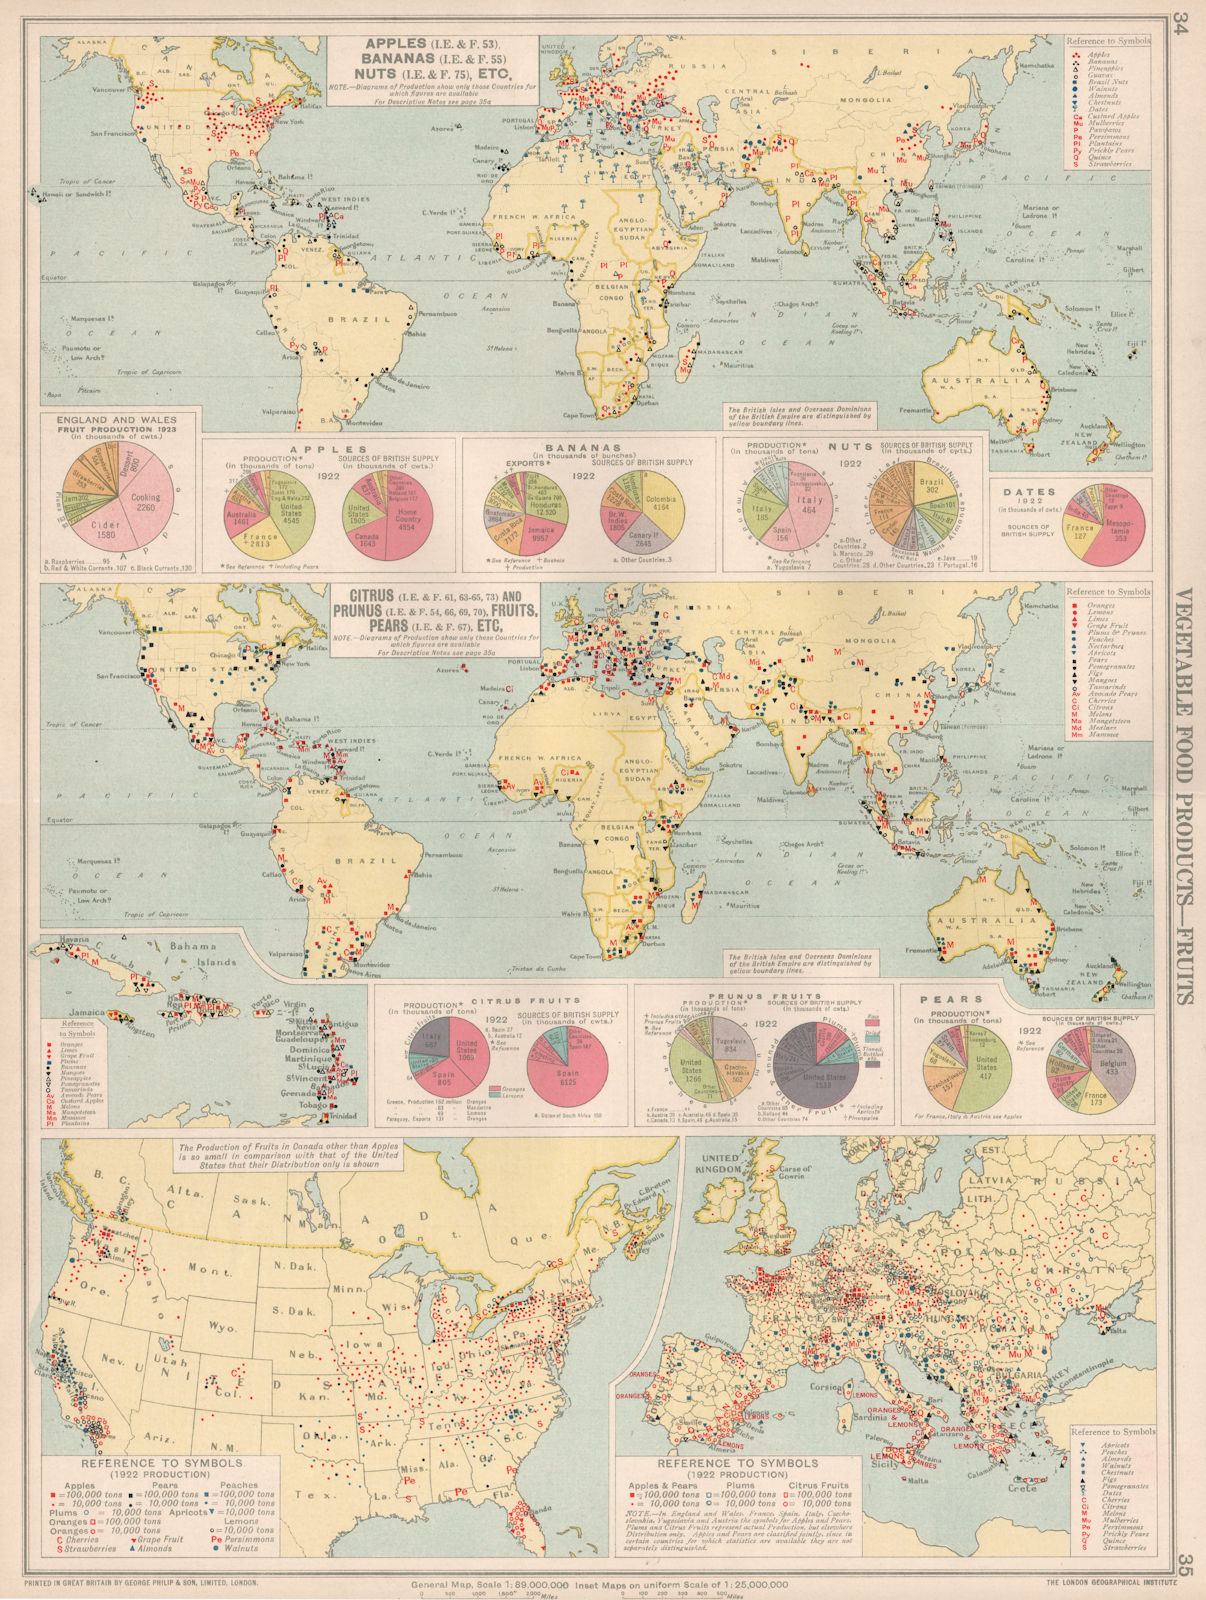 Associate Product World. Food Production. Fruits. Apples Bananas Nuts Citrus Prunes Pears 1925 map